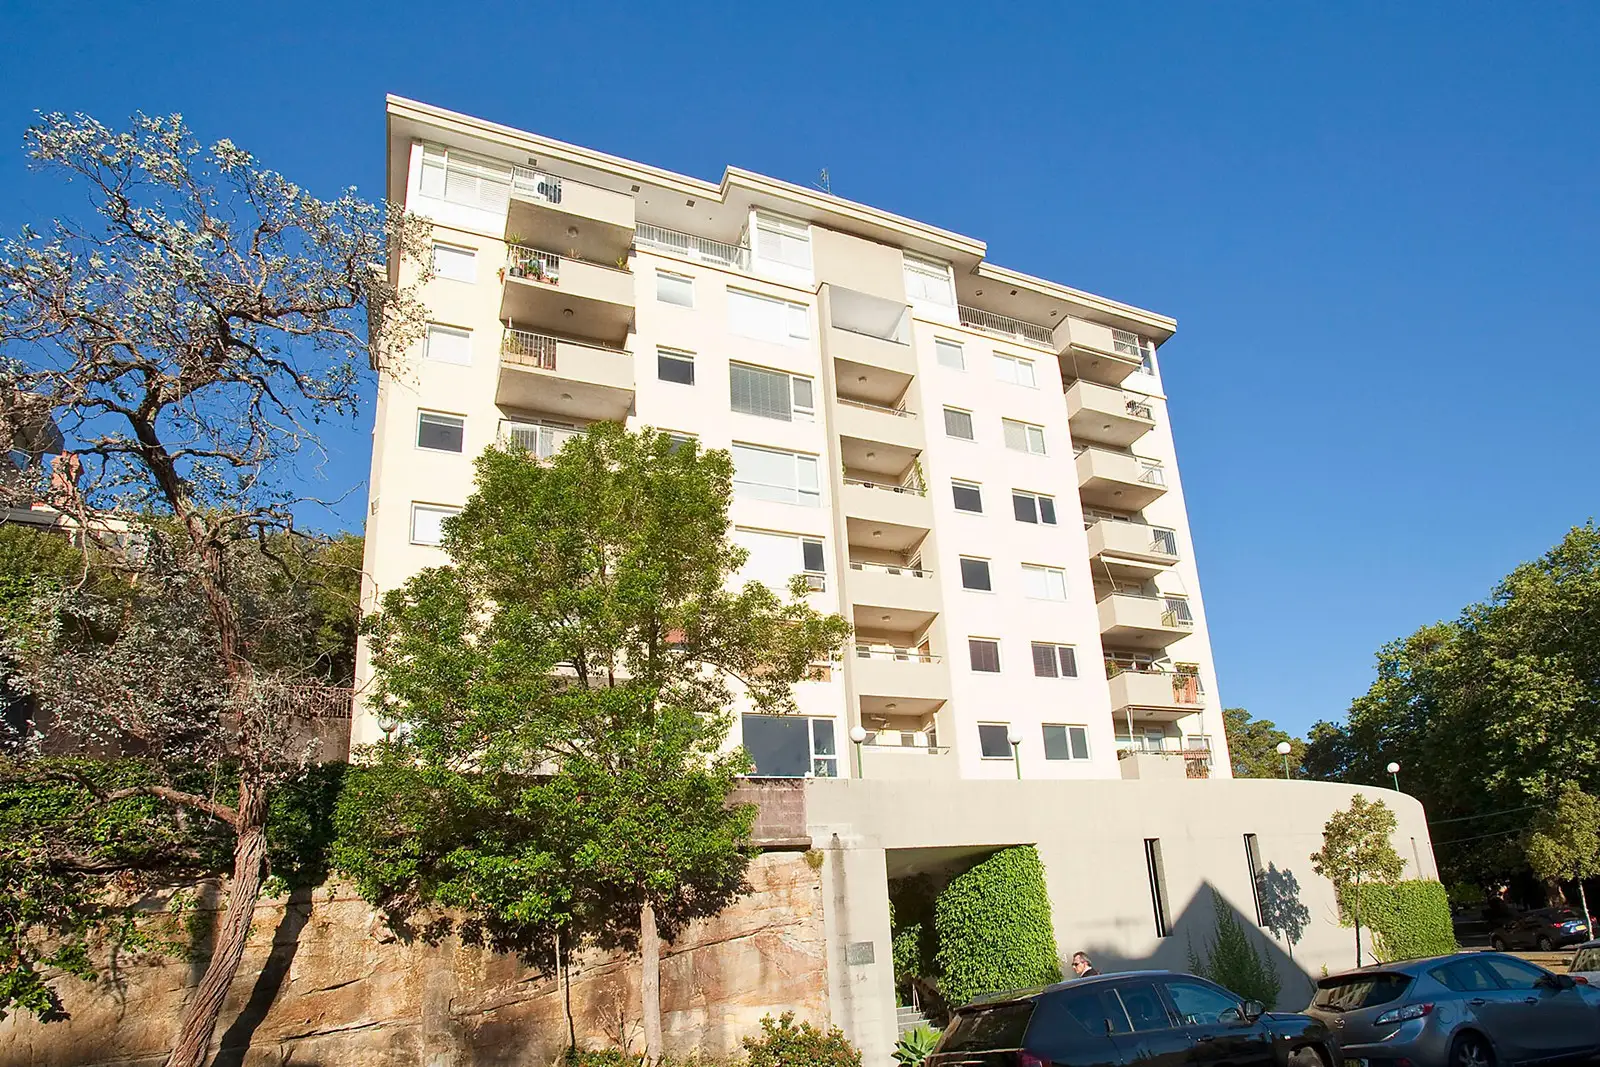 Photo #2: 22/14 Leura Road, Double Bay - Leased by Sydney Sotheby's International Realty